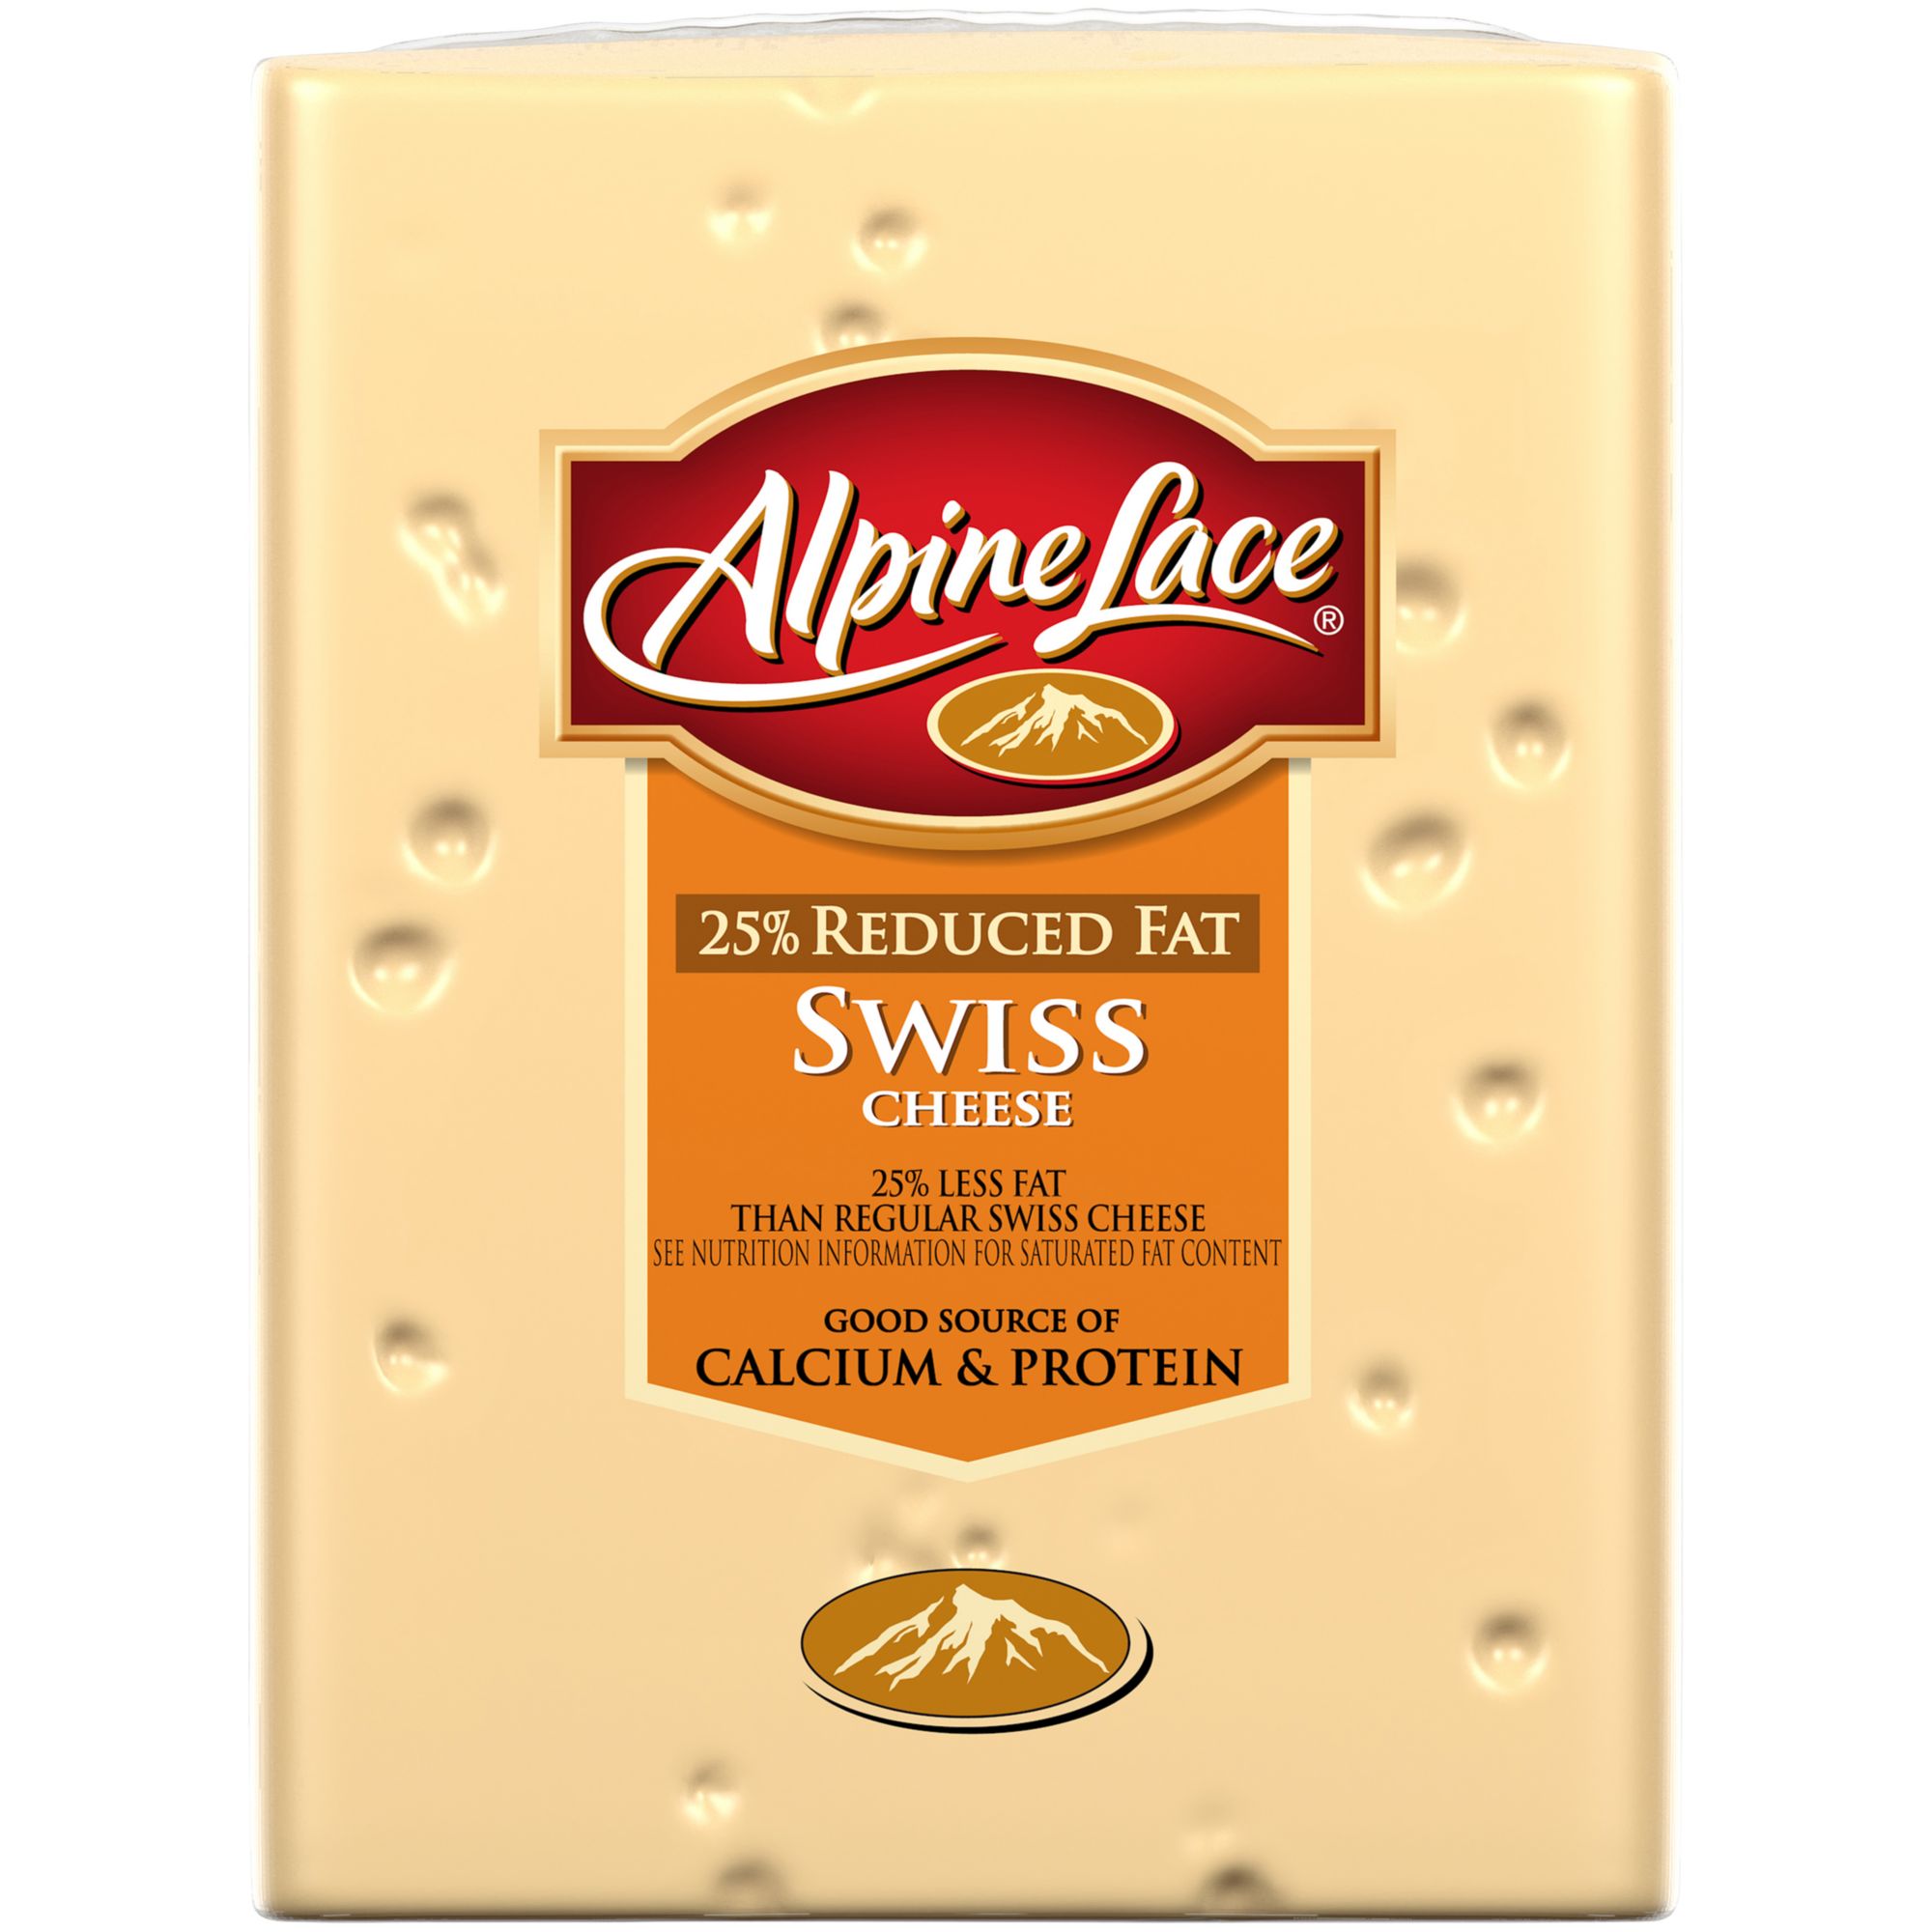 Alpine Lace 25% Reduced Fat Swiss Cheese, 0.75-1.5 lbs.